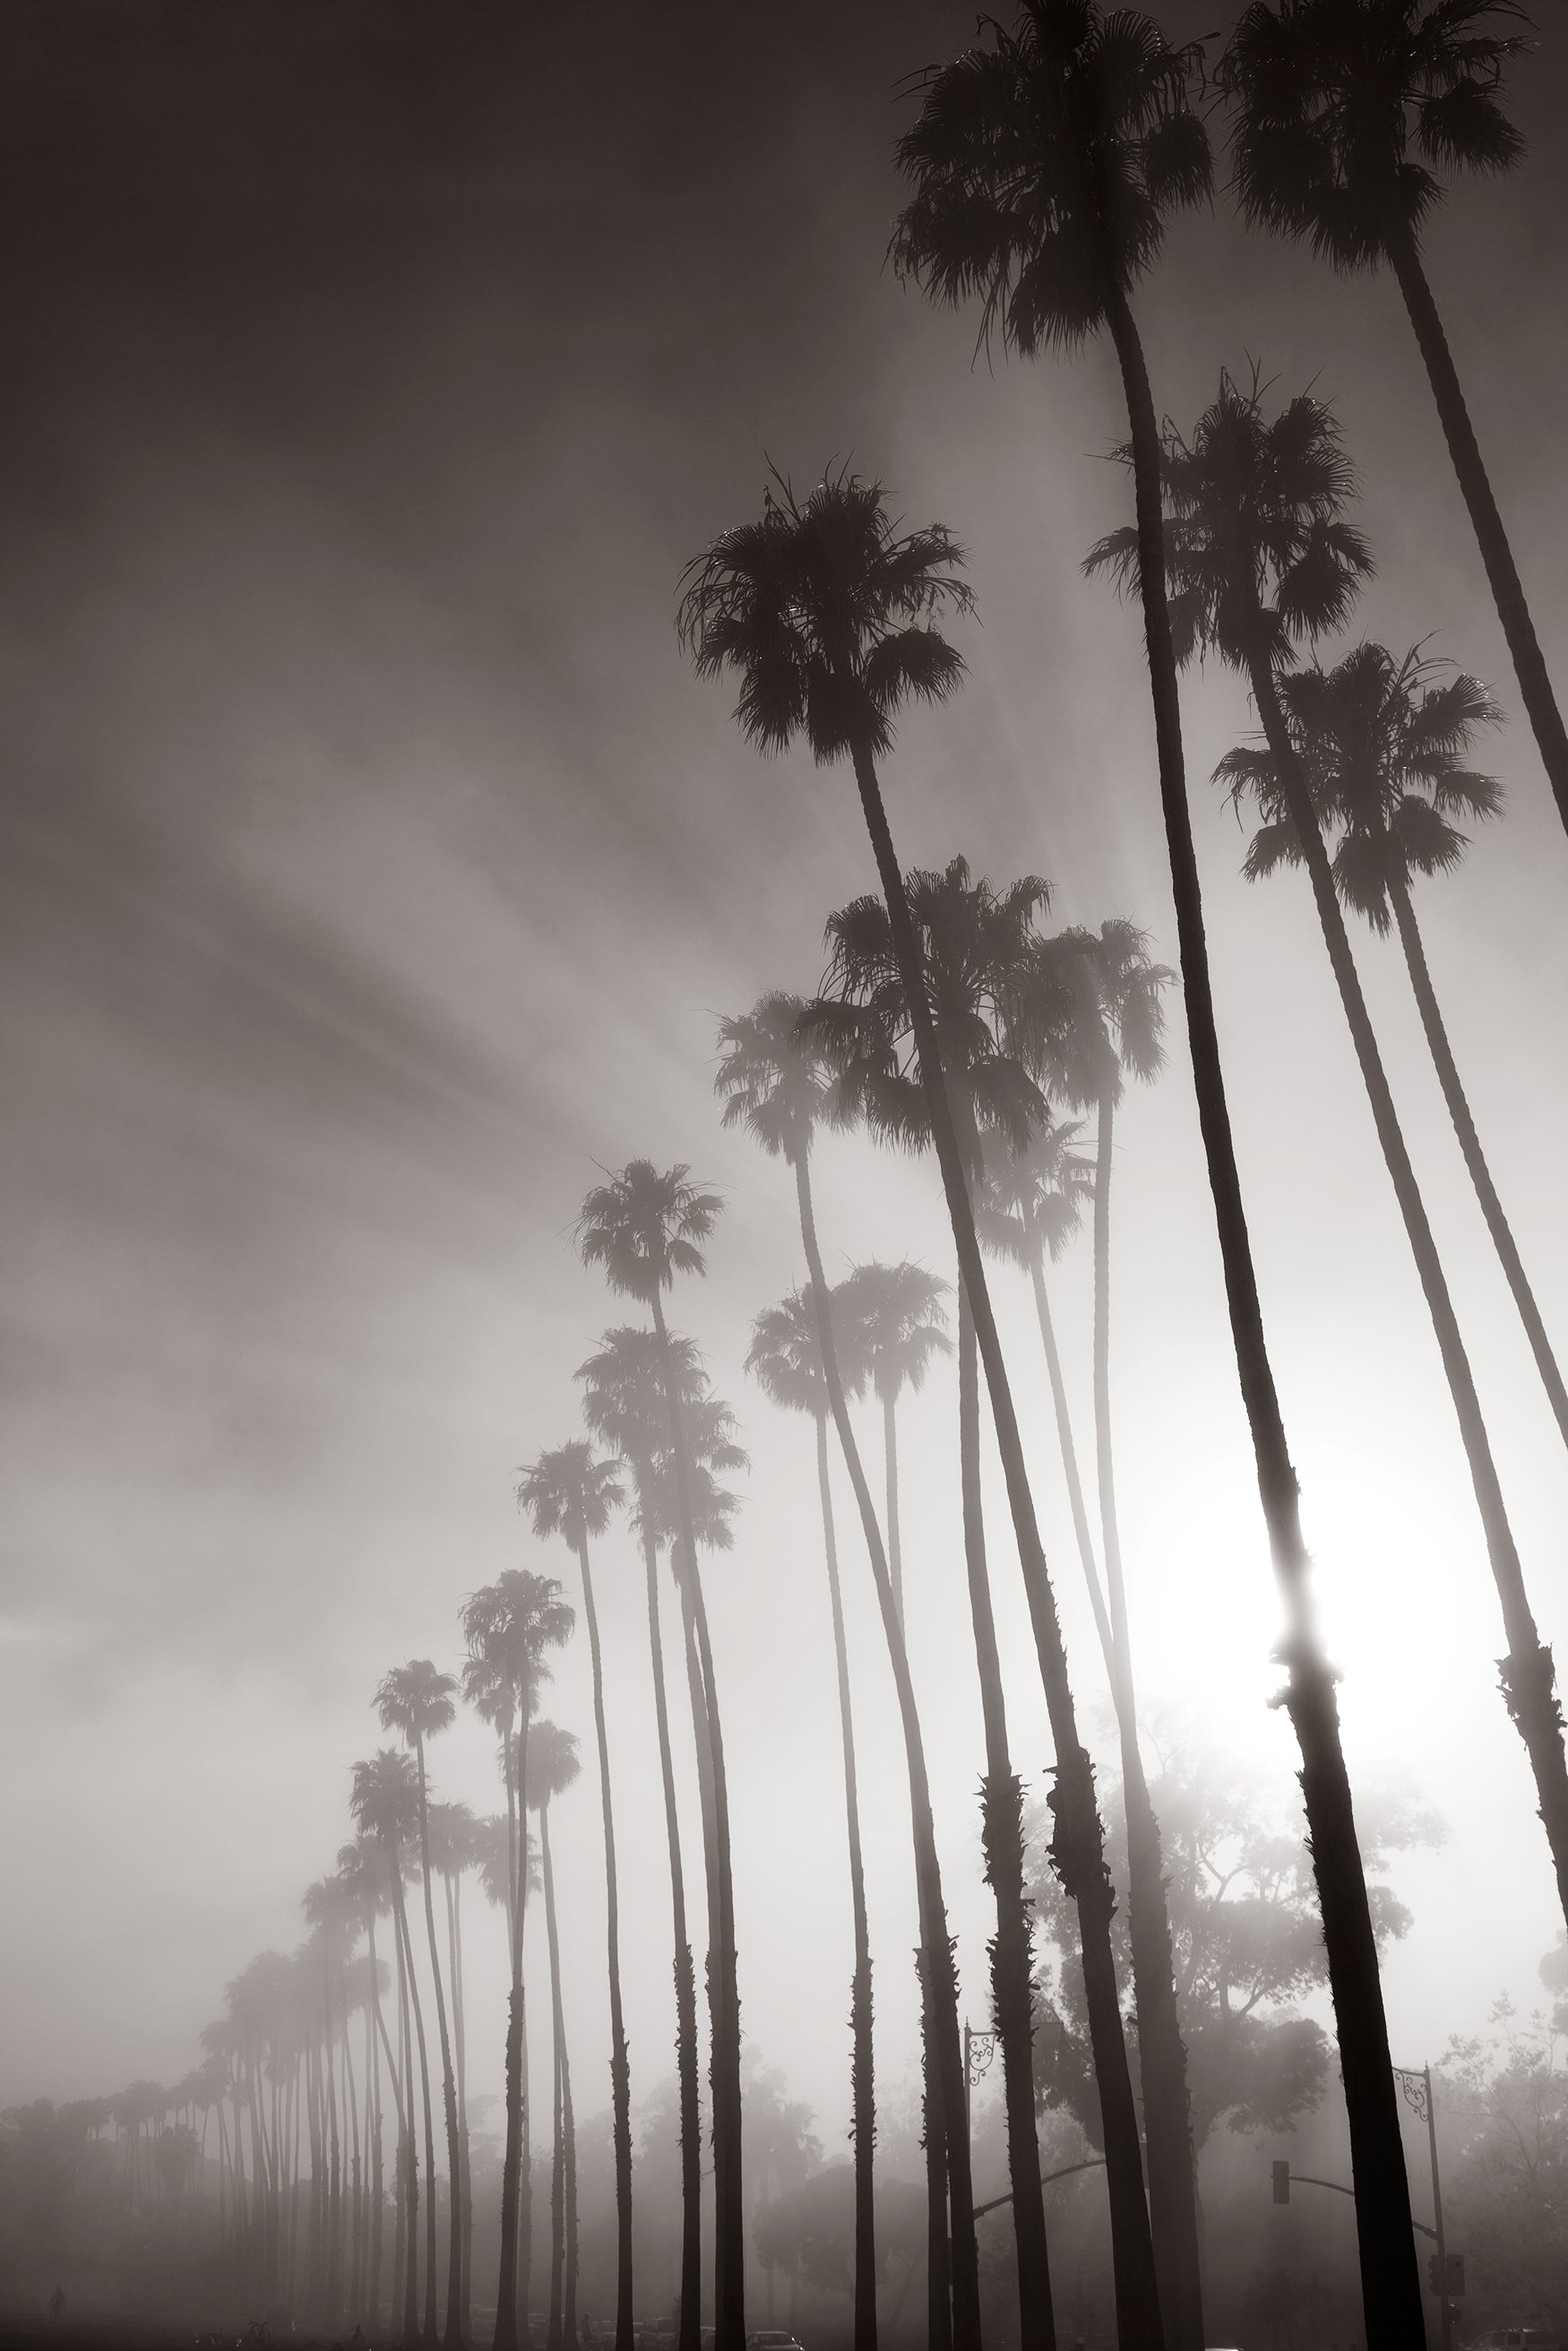  Michael Haber   Misty palms,  2021  100% Archival fine art print    Small: 40 x 30 in. Editions of 20, 25 and 30  Medium: 60 x 40 in. Editions of 20 and 25  Large: 70 X 50 in. Editions of 15 and 20  Extra Large: 96 X 50 in Editions of 10 